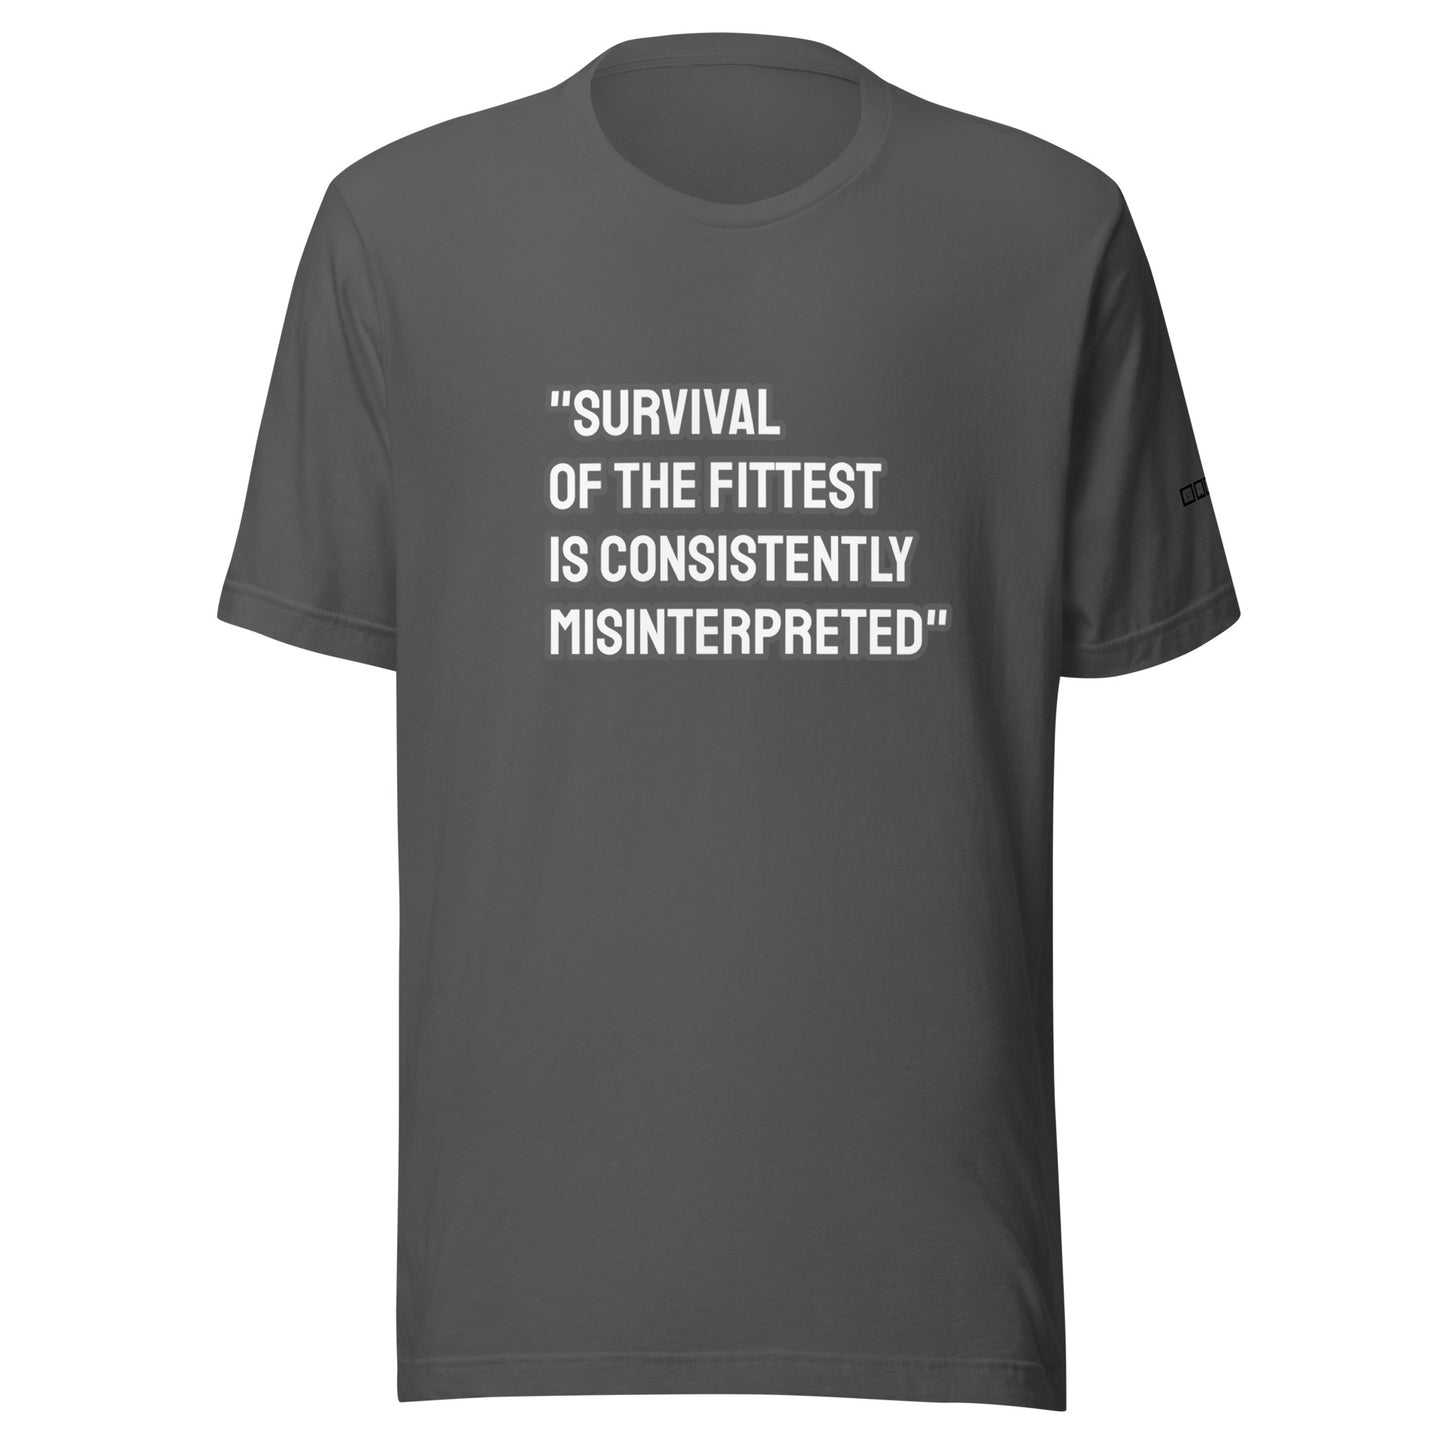 "Survival of The Fittest" Quote Tee